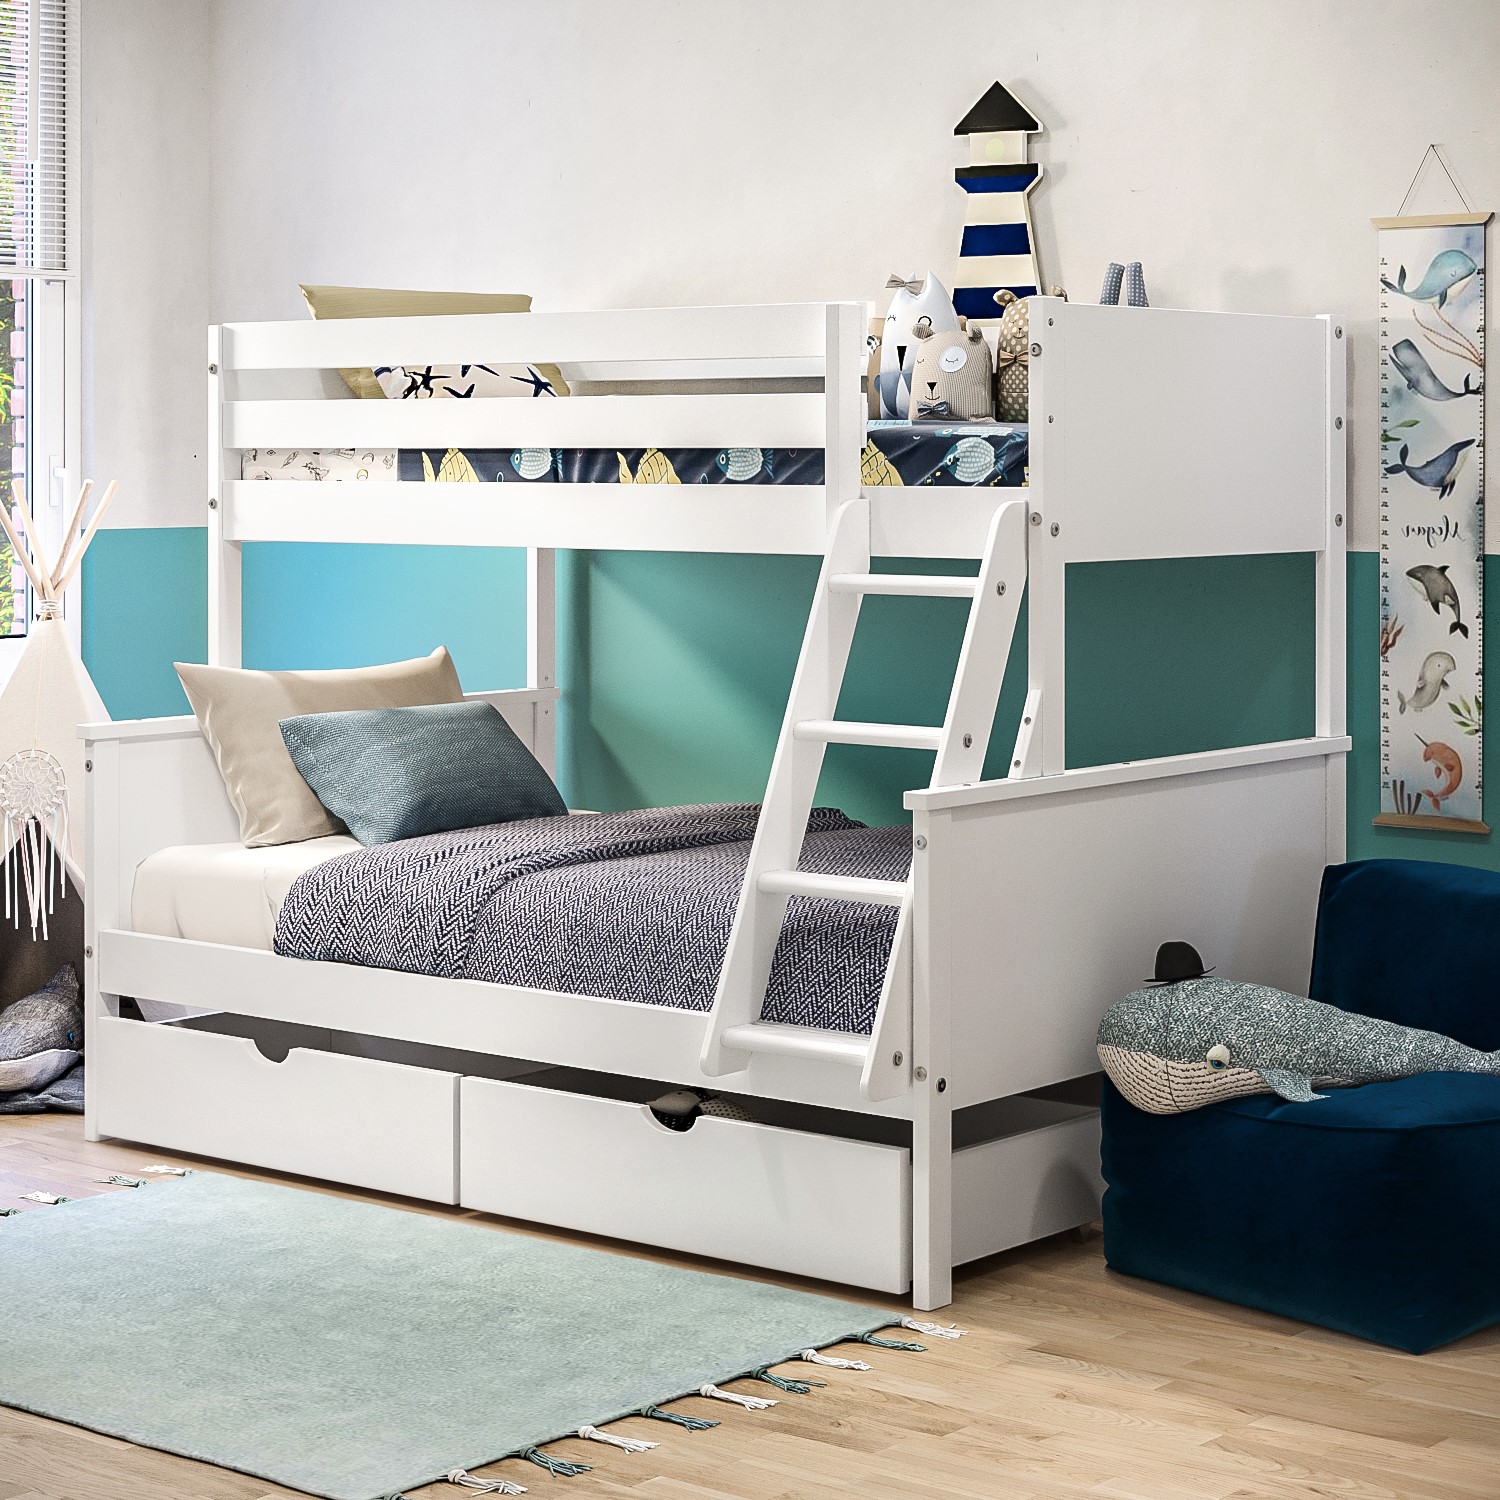 Photo of White wooden triple sleeper bunk bed with storage drawers - parker